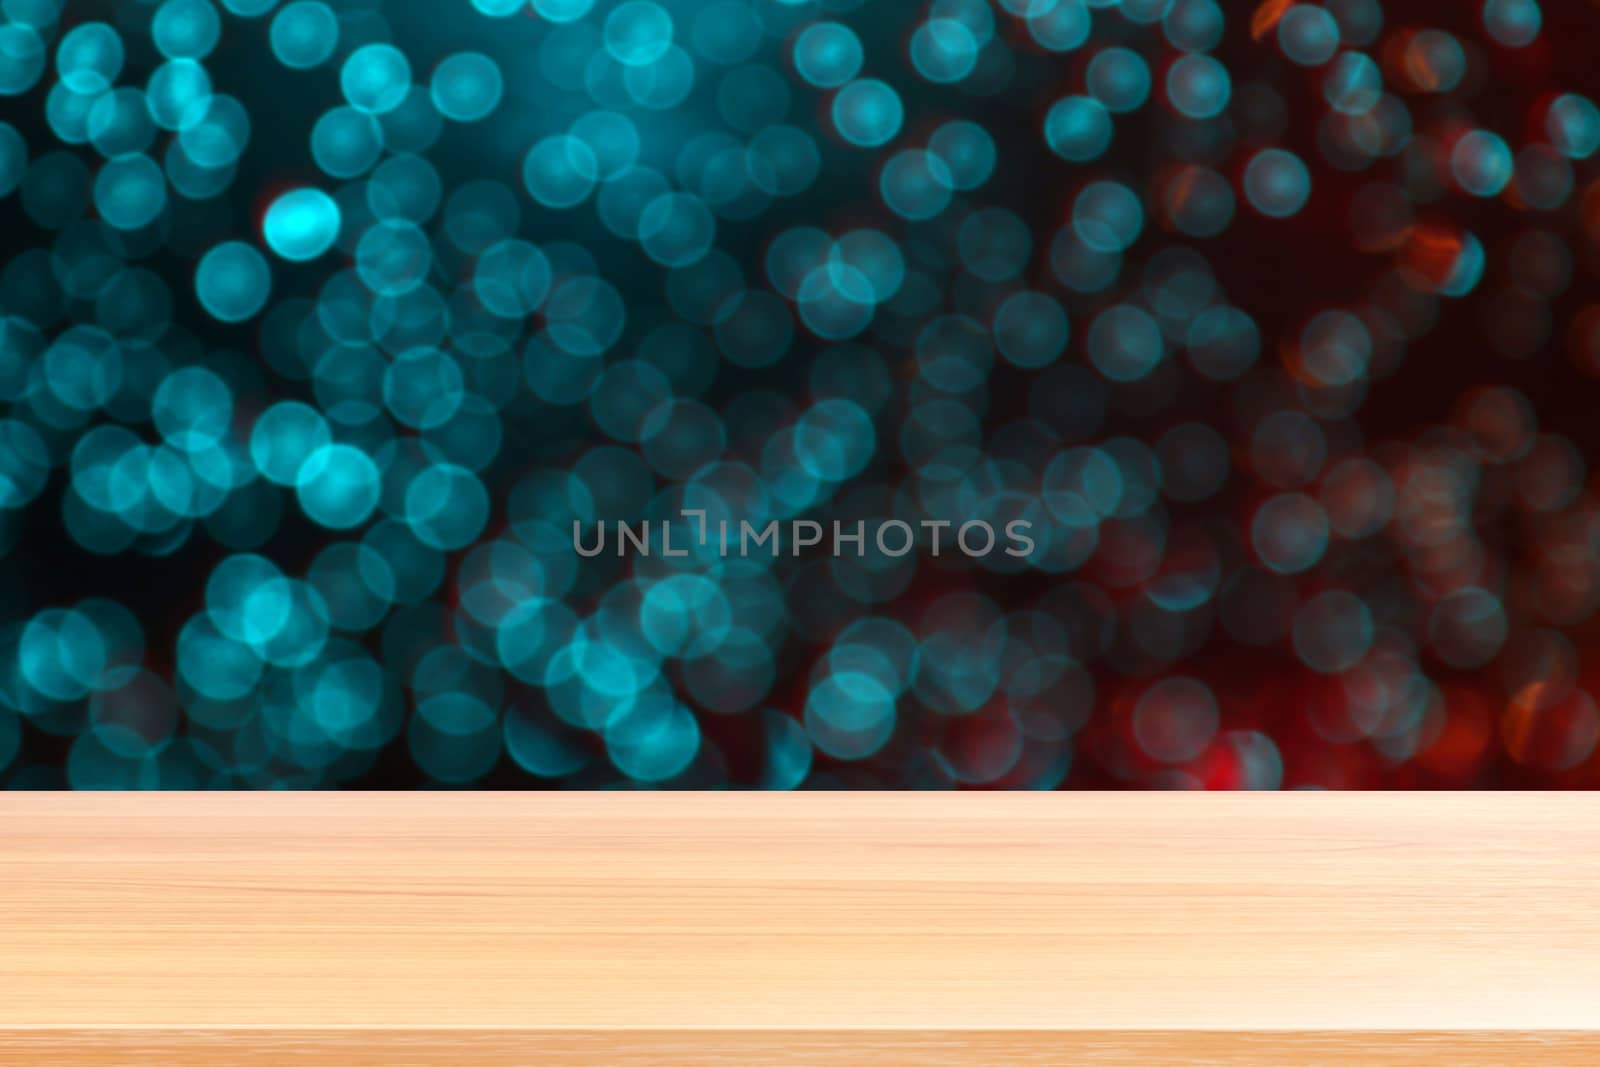 wood plank on abstract blurred blue red silver glittering shine bulbs lights background, empty wood table floors on Bokeh Blur dot light xmas, wood table board empty front sparkle circle lit display by cgdeaw